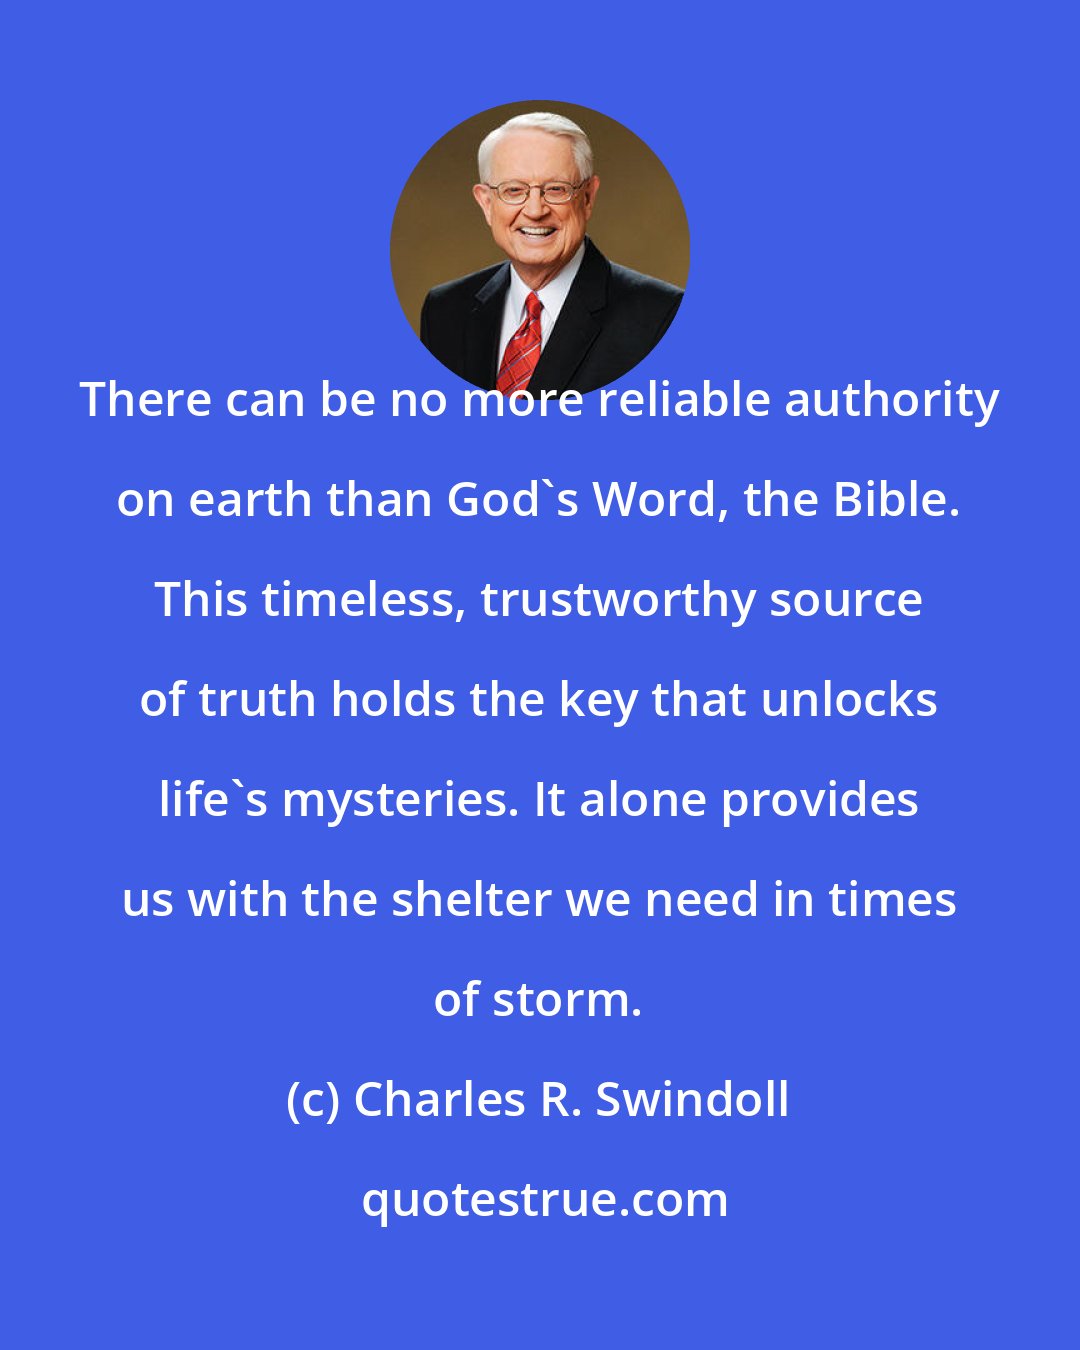 Charles R. Swindoll: There can be no more reliable authority on earth than God's Word, the Bible. This timeless, trustworthy source of truth holds the key that unlocks life's mysteries. It alone provides us with the shelter we need in times of storm.